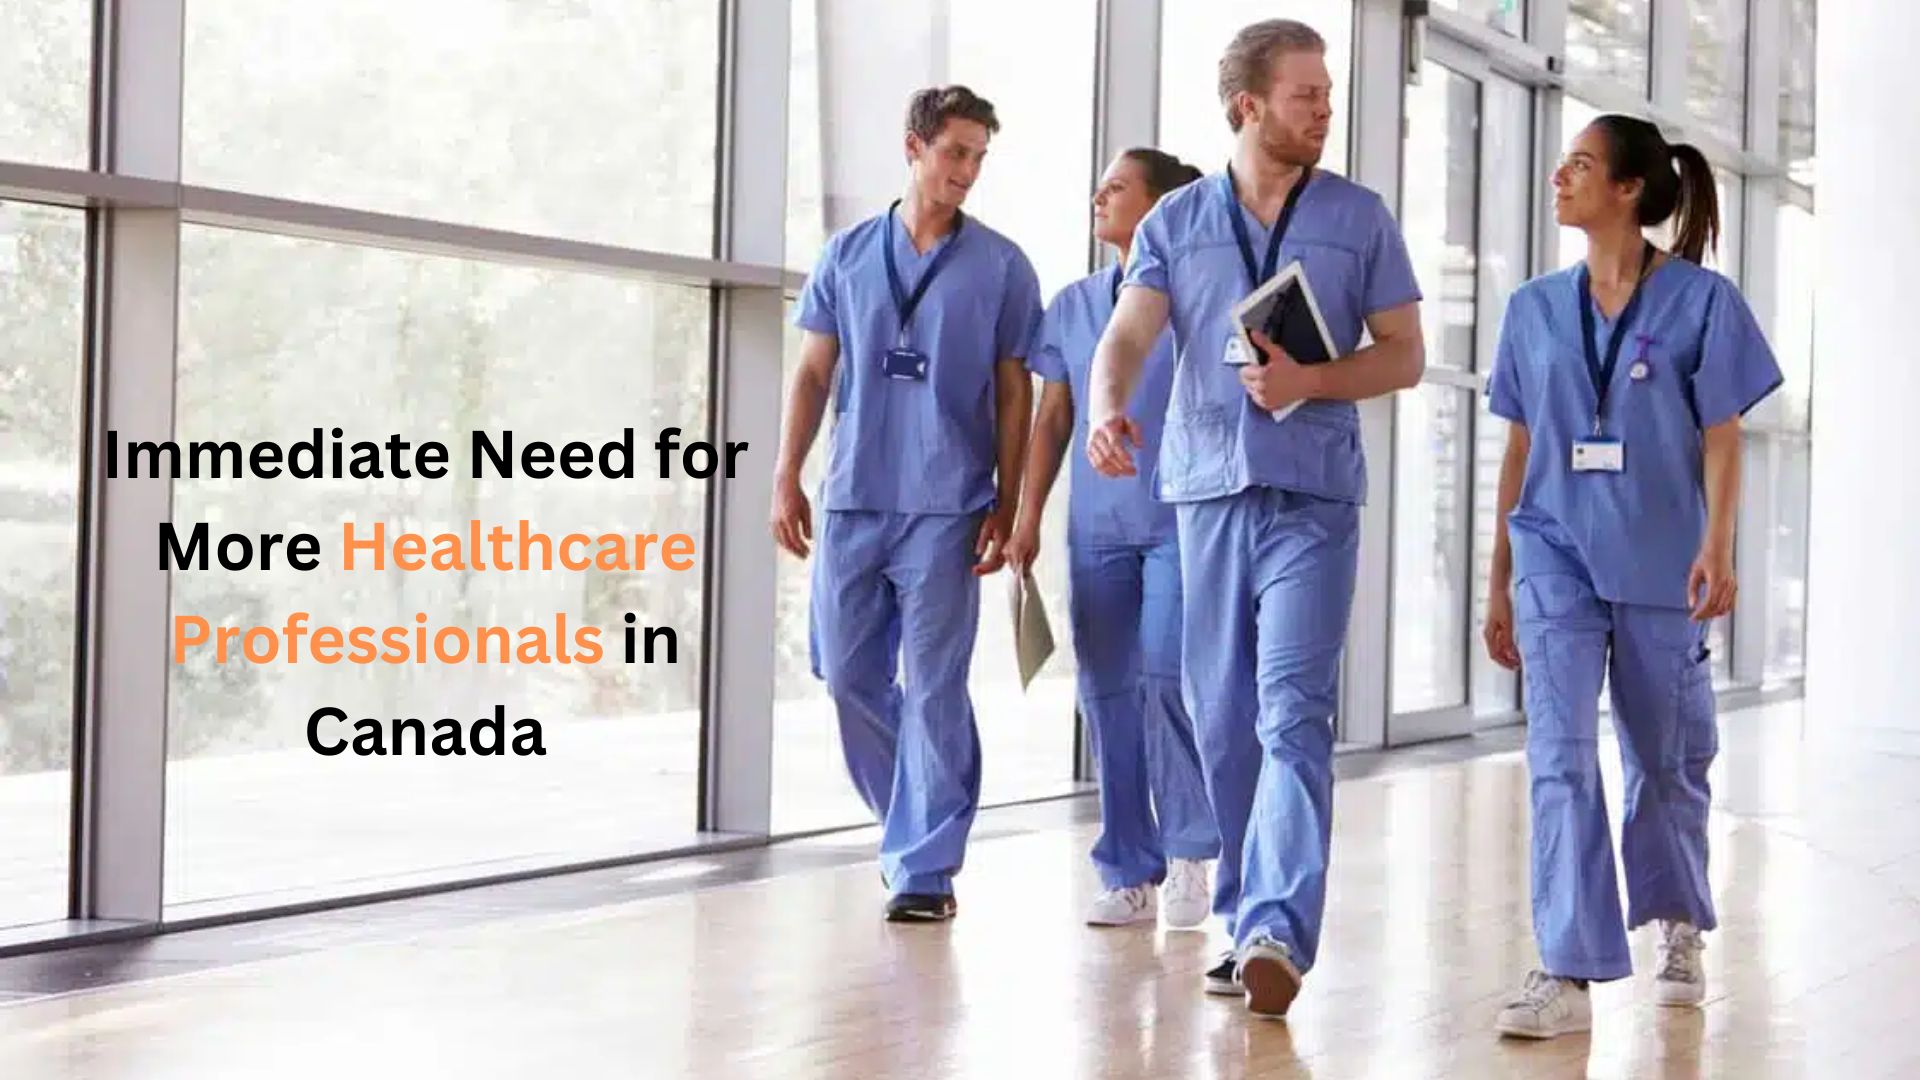 Immediate Need for More Healthcare Professionals in Canada